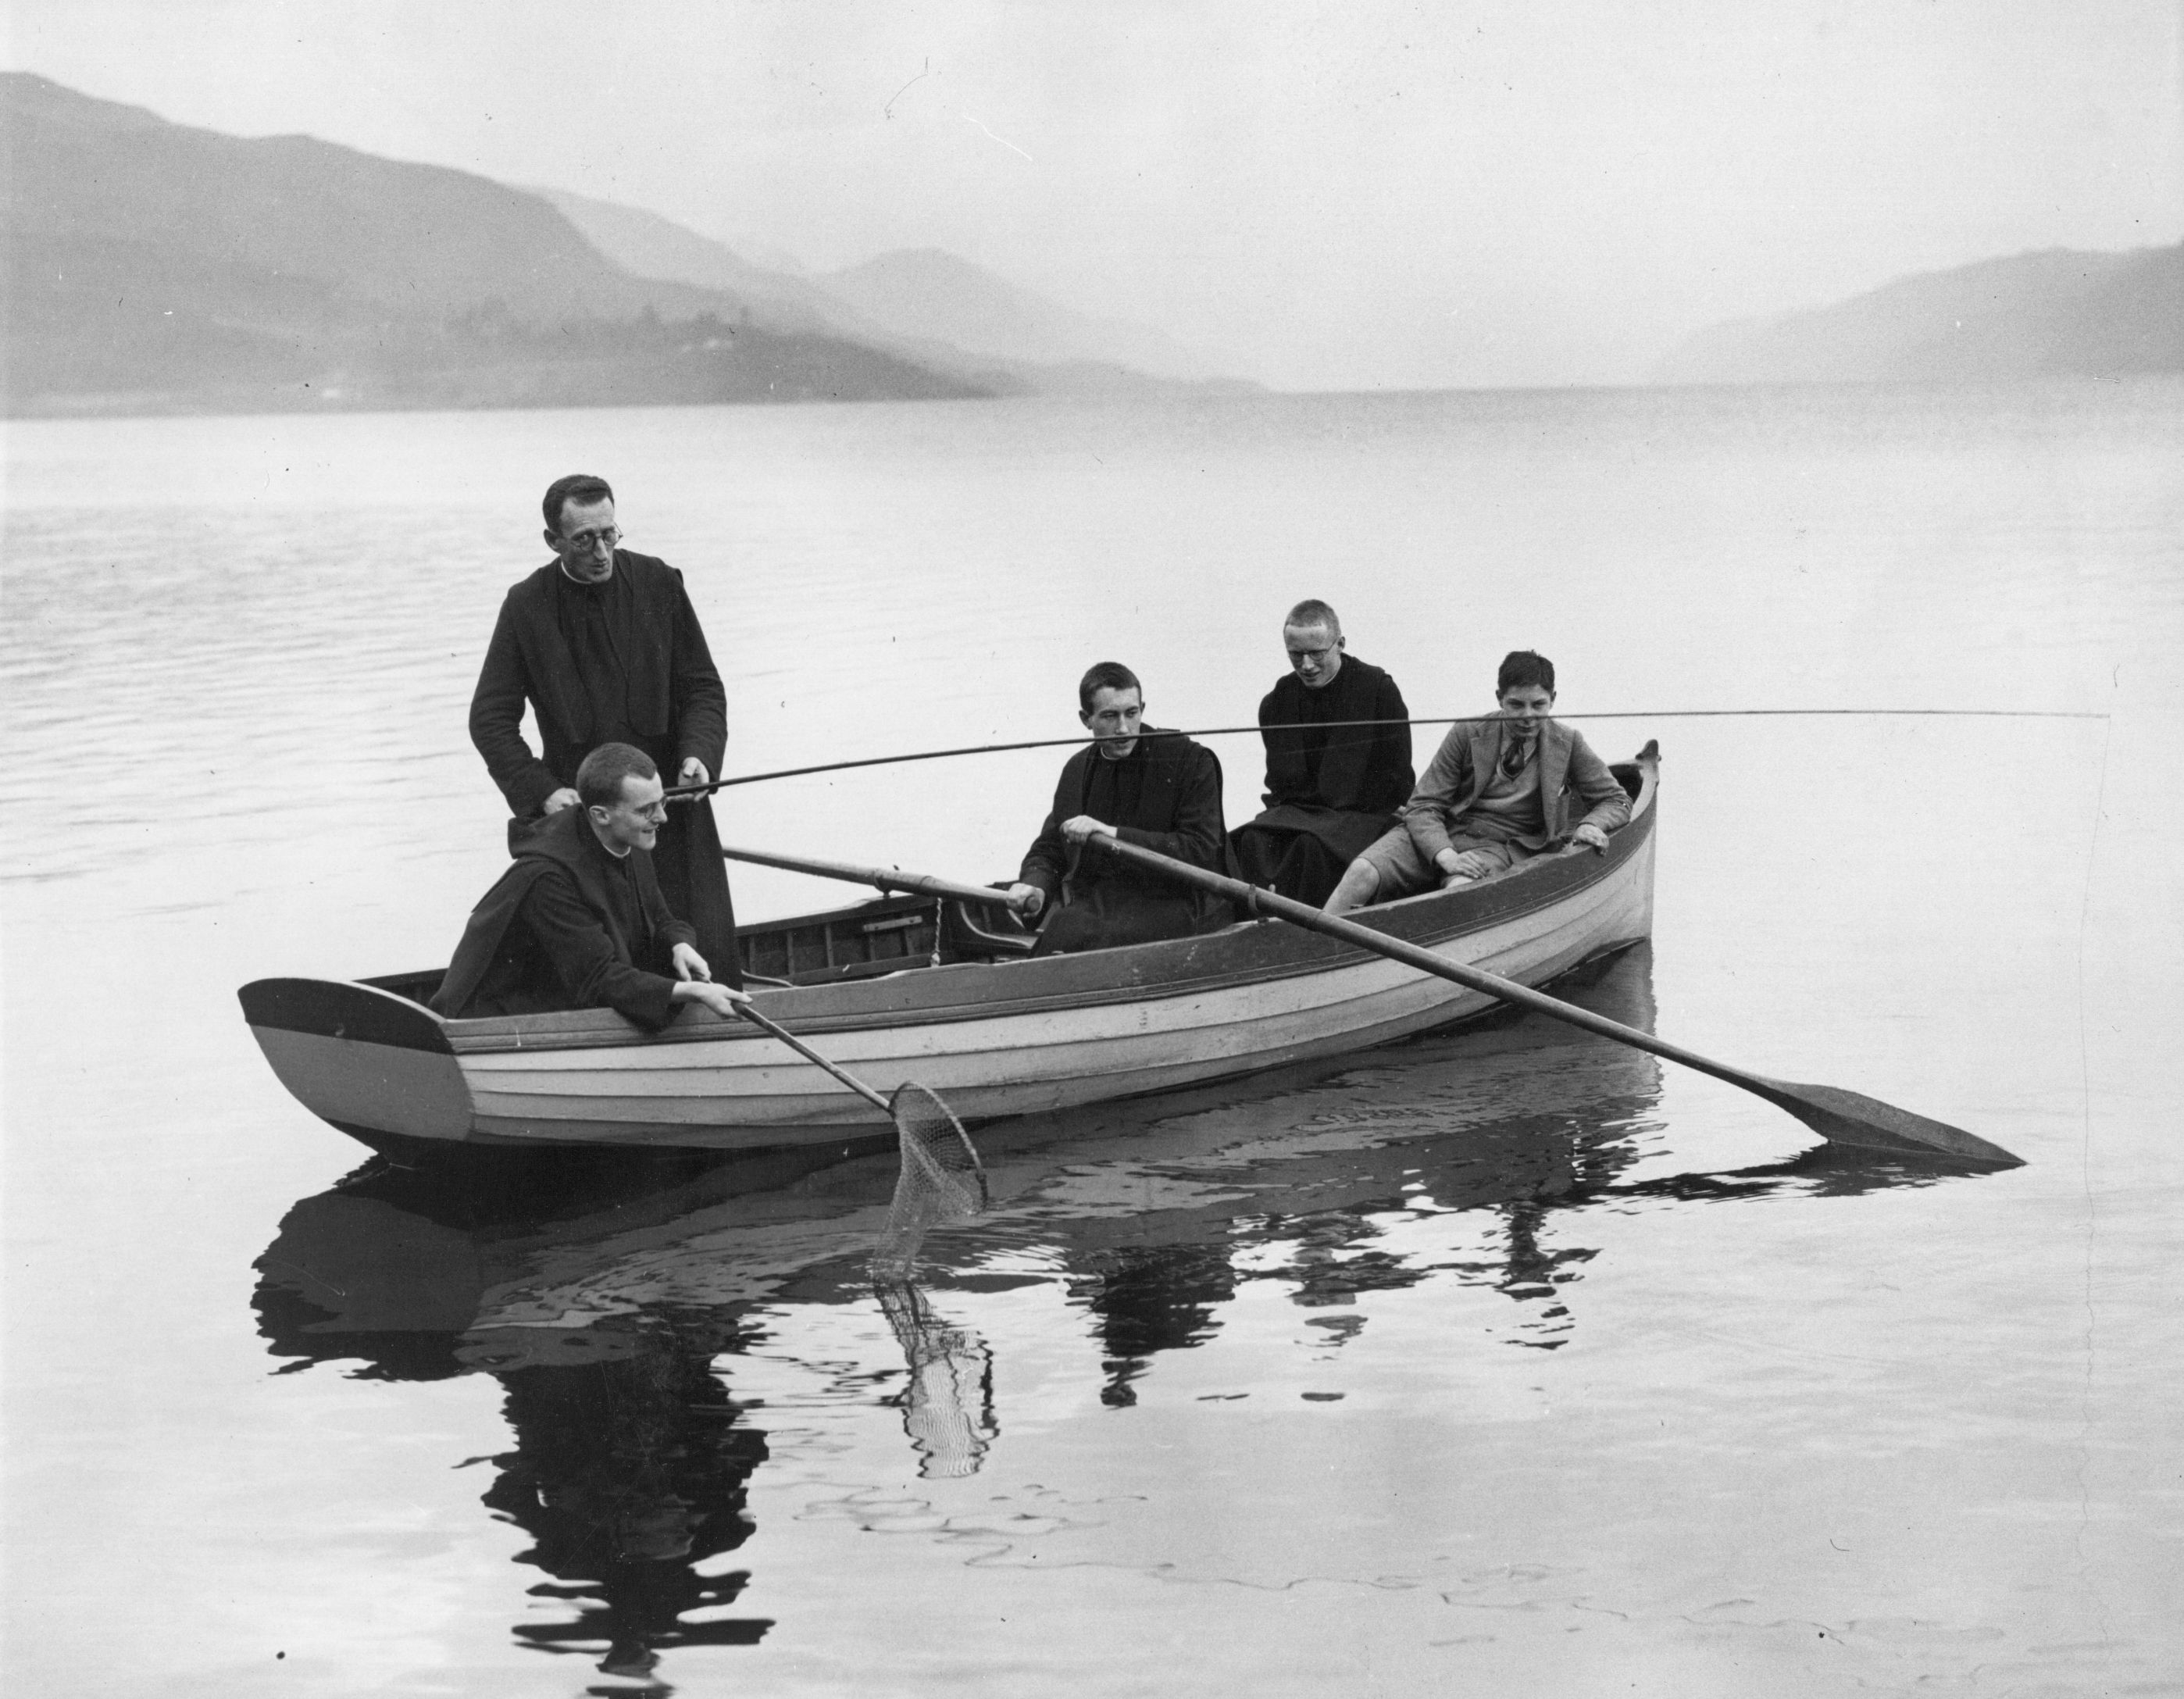  A group of monks from the Fort Augustus Abbey go angling on Loch Ness which is famed for its mythical monster on February 23, 1935. 